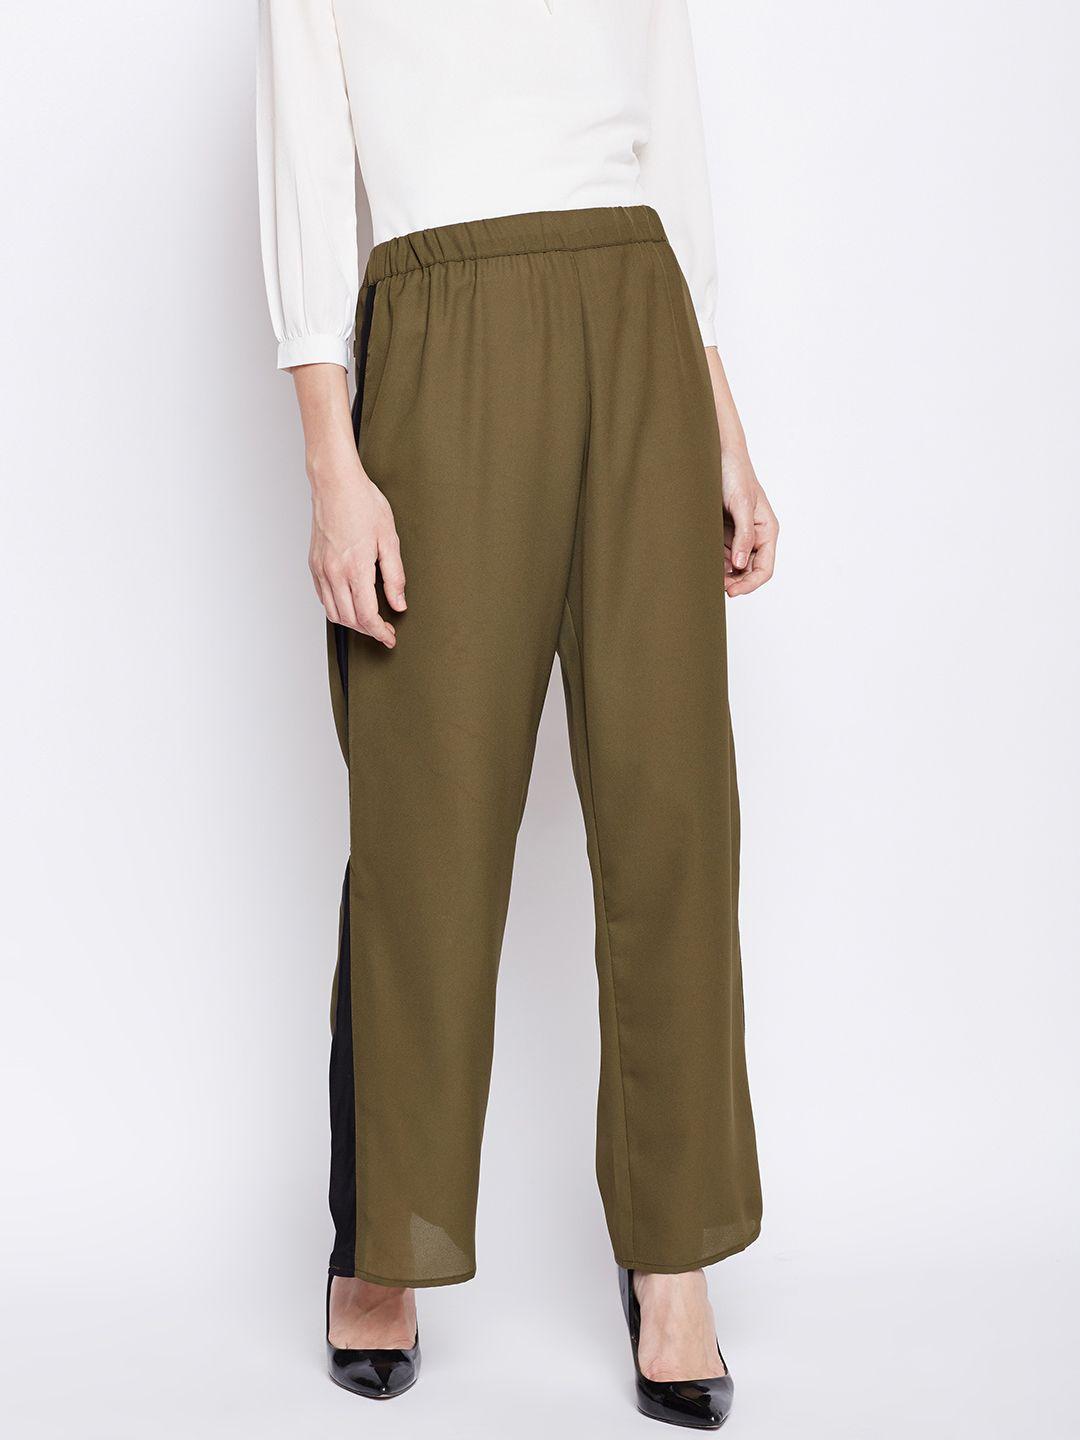 oxolloxo women olive green & black solid parallel trousers